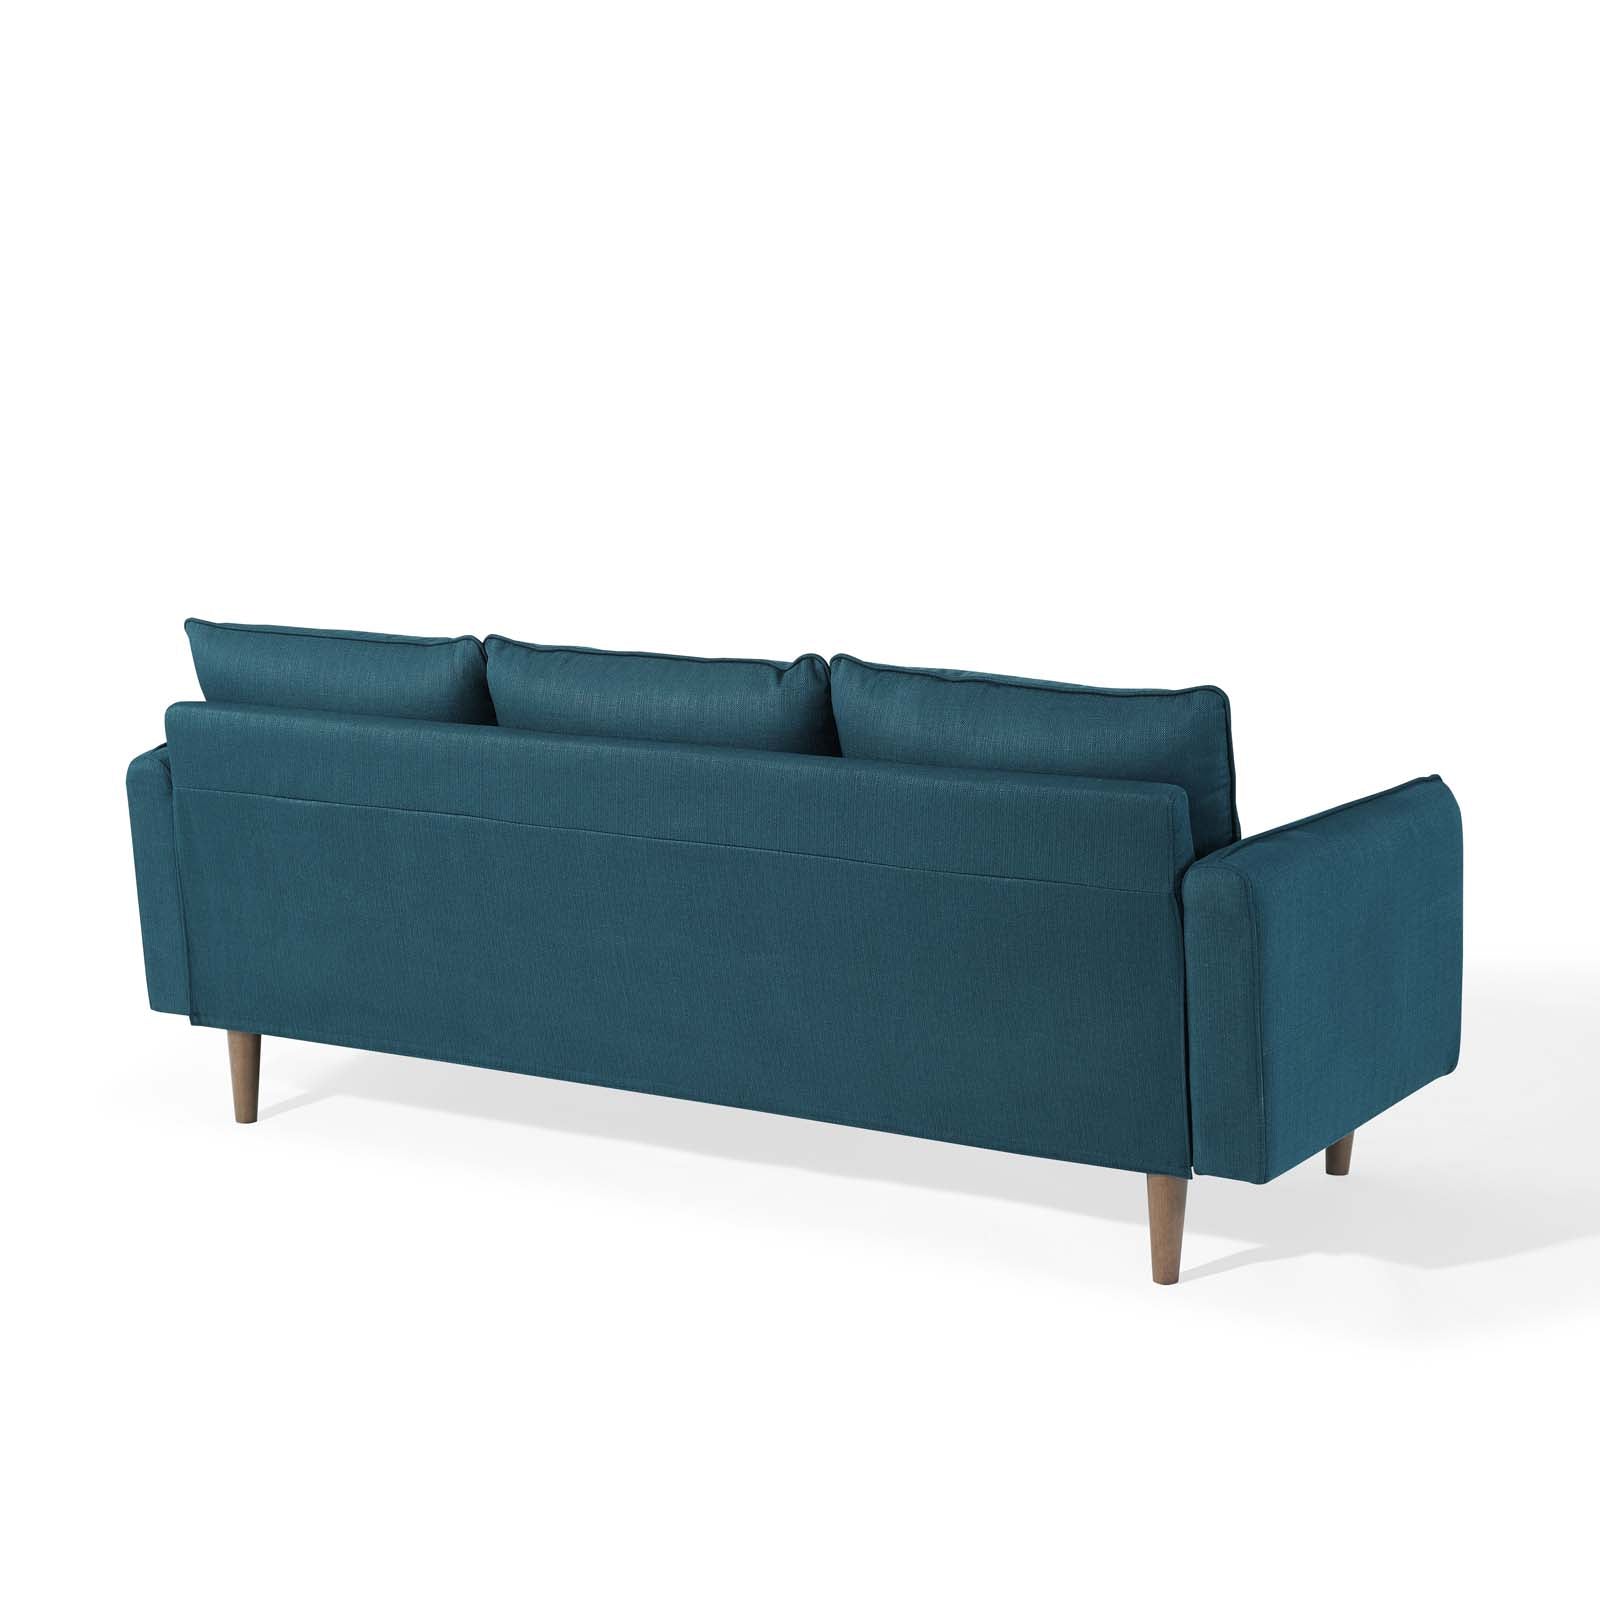 Revive Upholstered Convertible Sectional Sofa - East Shore Modern Home Furnishings